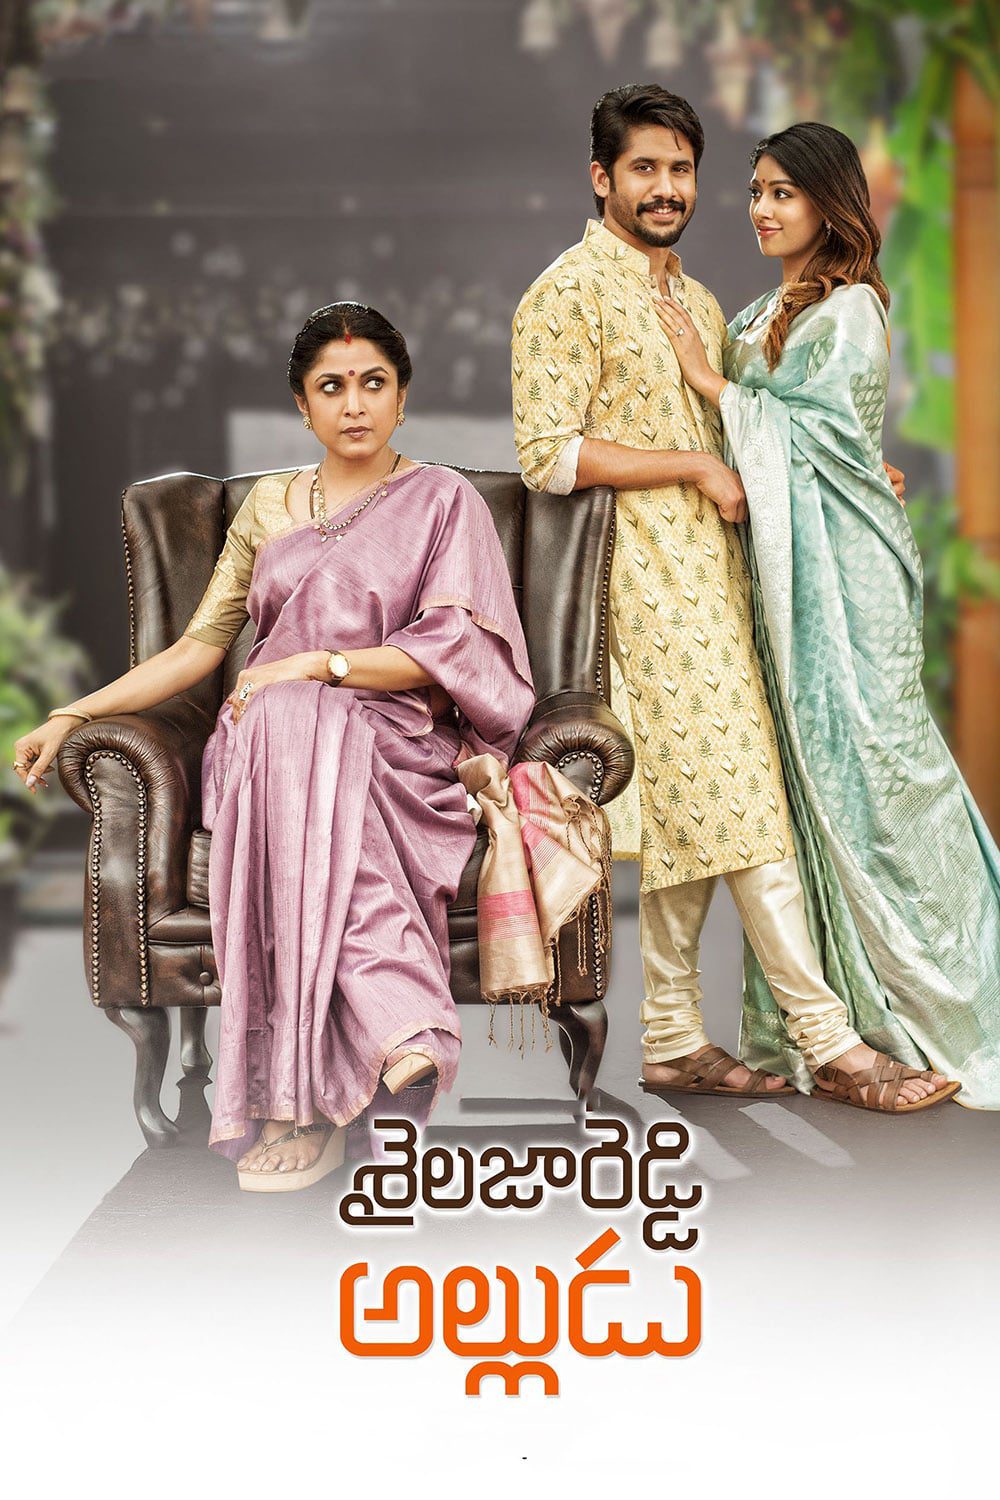 Poster for the movie "Shailaja Reddy Alludu"